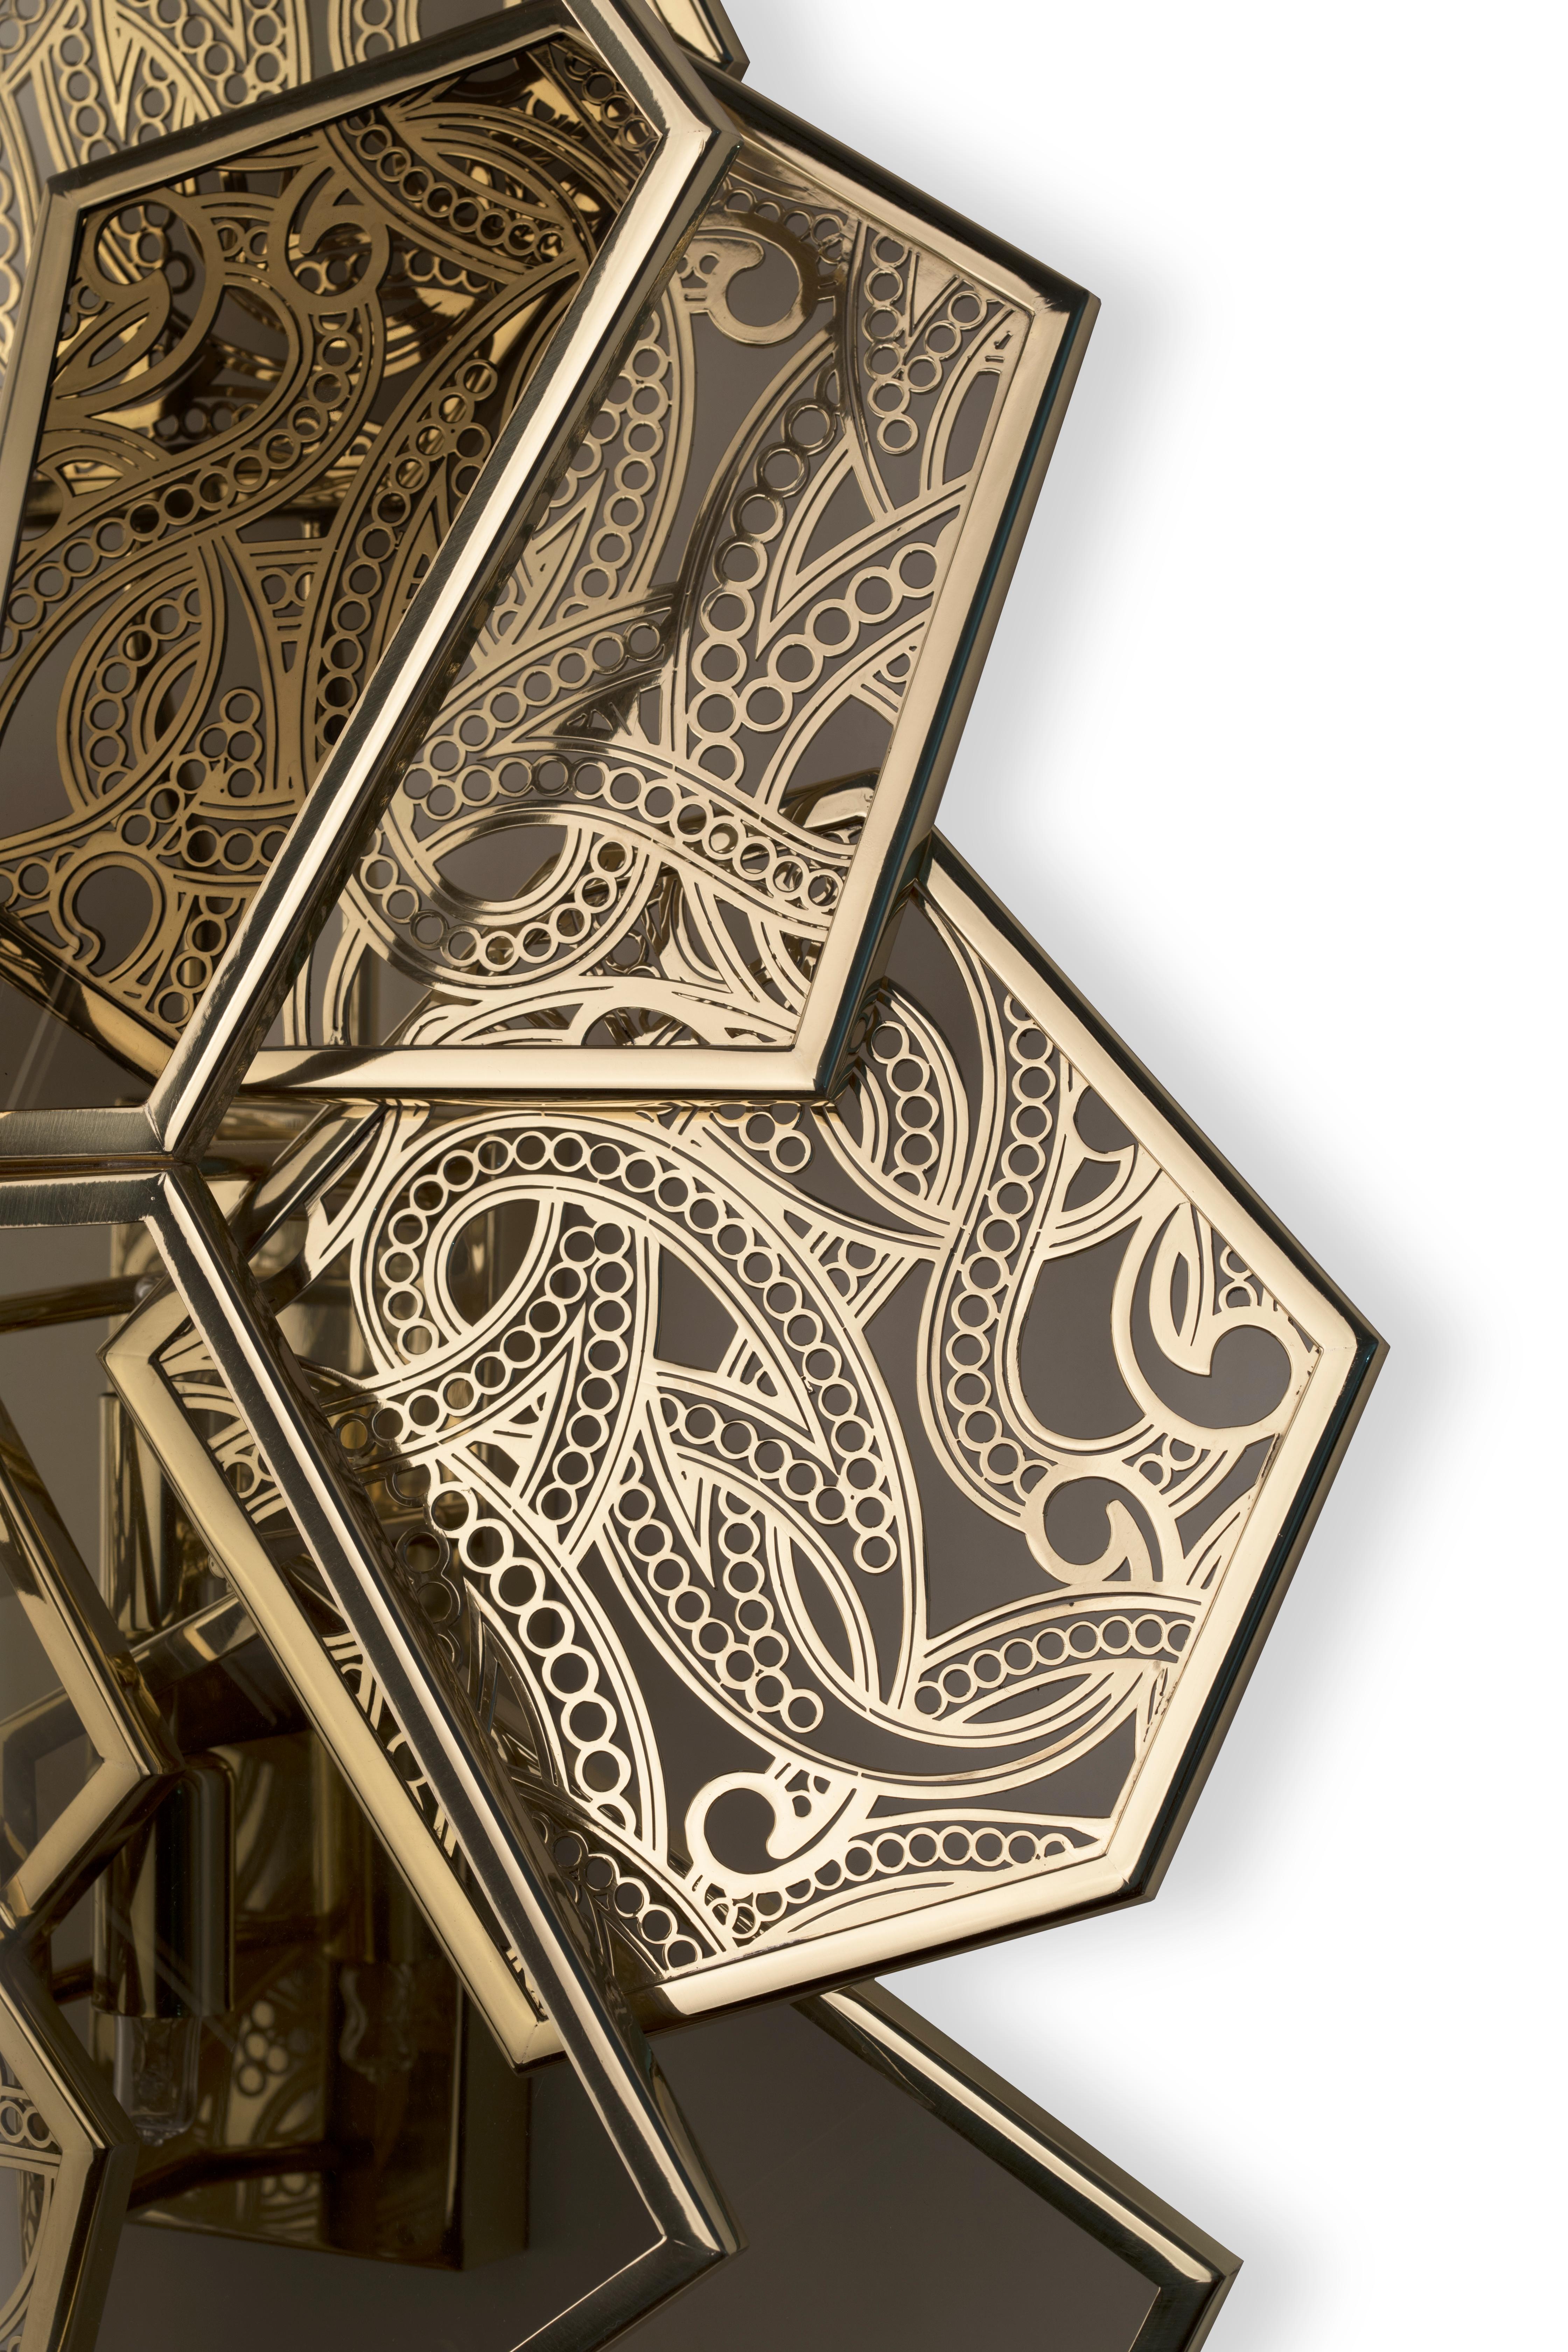 This sleek and elegant sconce will hypnotize its audience. You will become mesmerized as the intricately fashioned sconce coils and bends in golden spirals; weaving itself elaborately within the sharp polished lines of the hexagonal silhouette. The